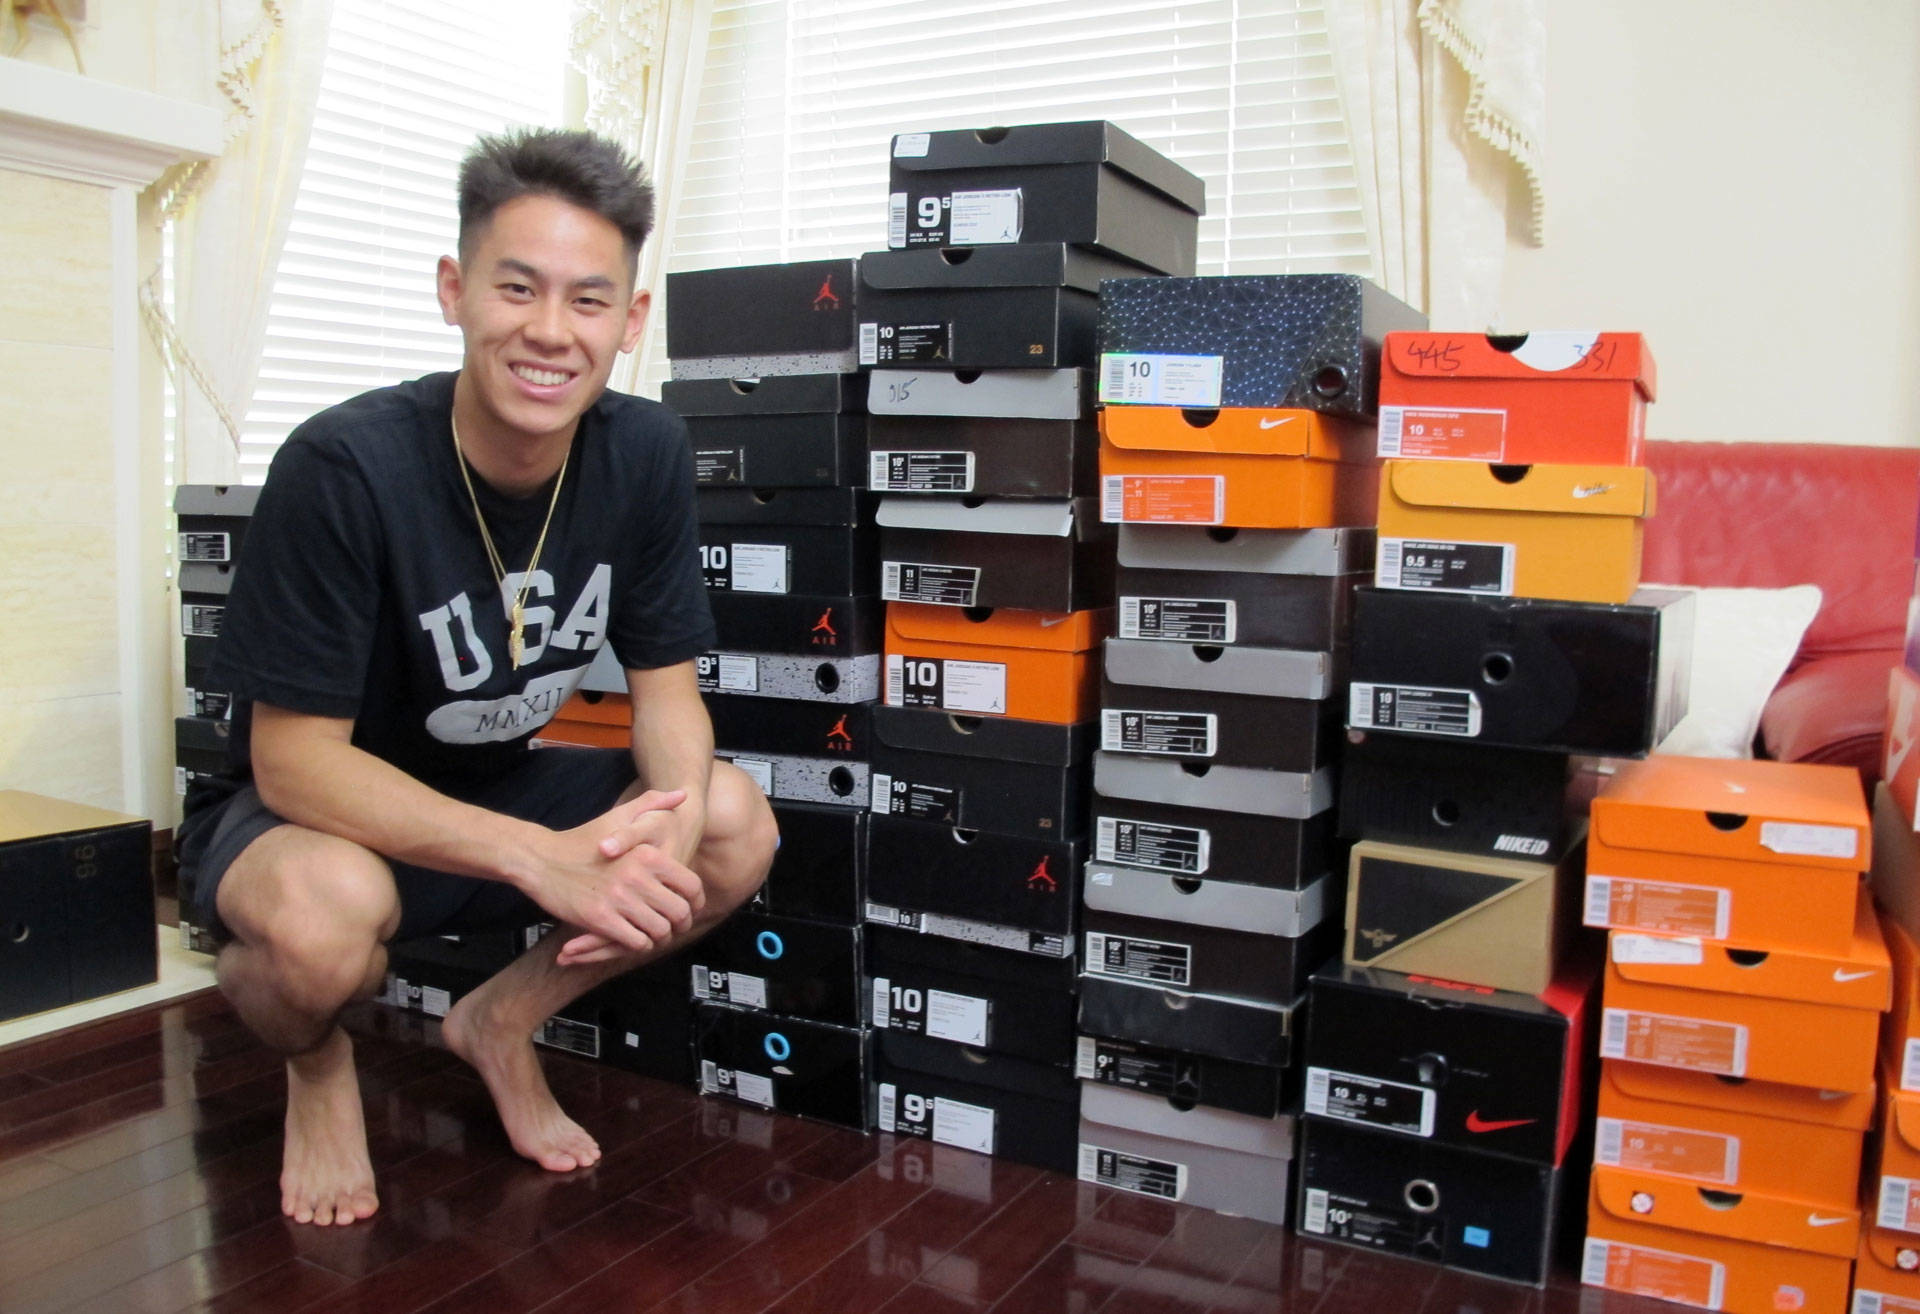 A smiling individual sitting next to a large stack of shoeboxes from various popular brands, indicating a collection of footwear.